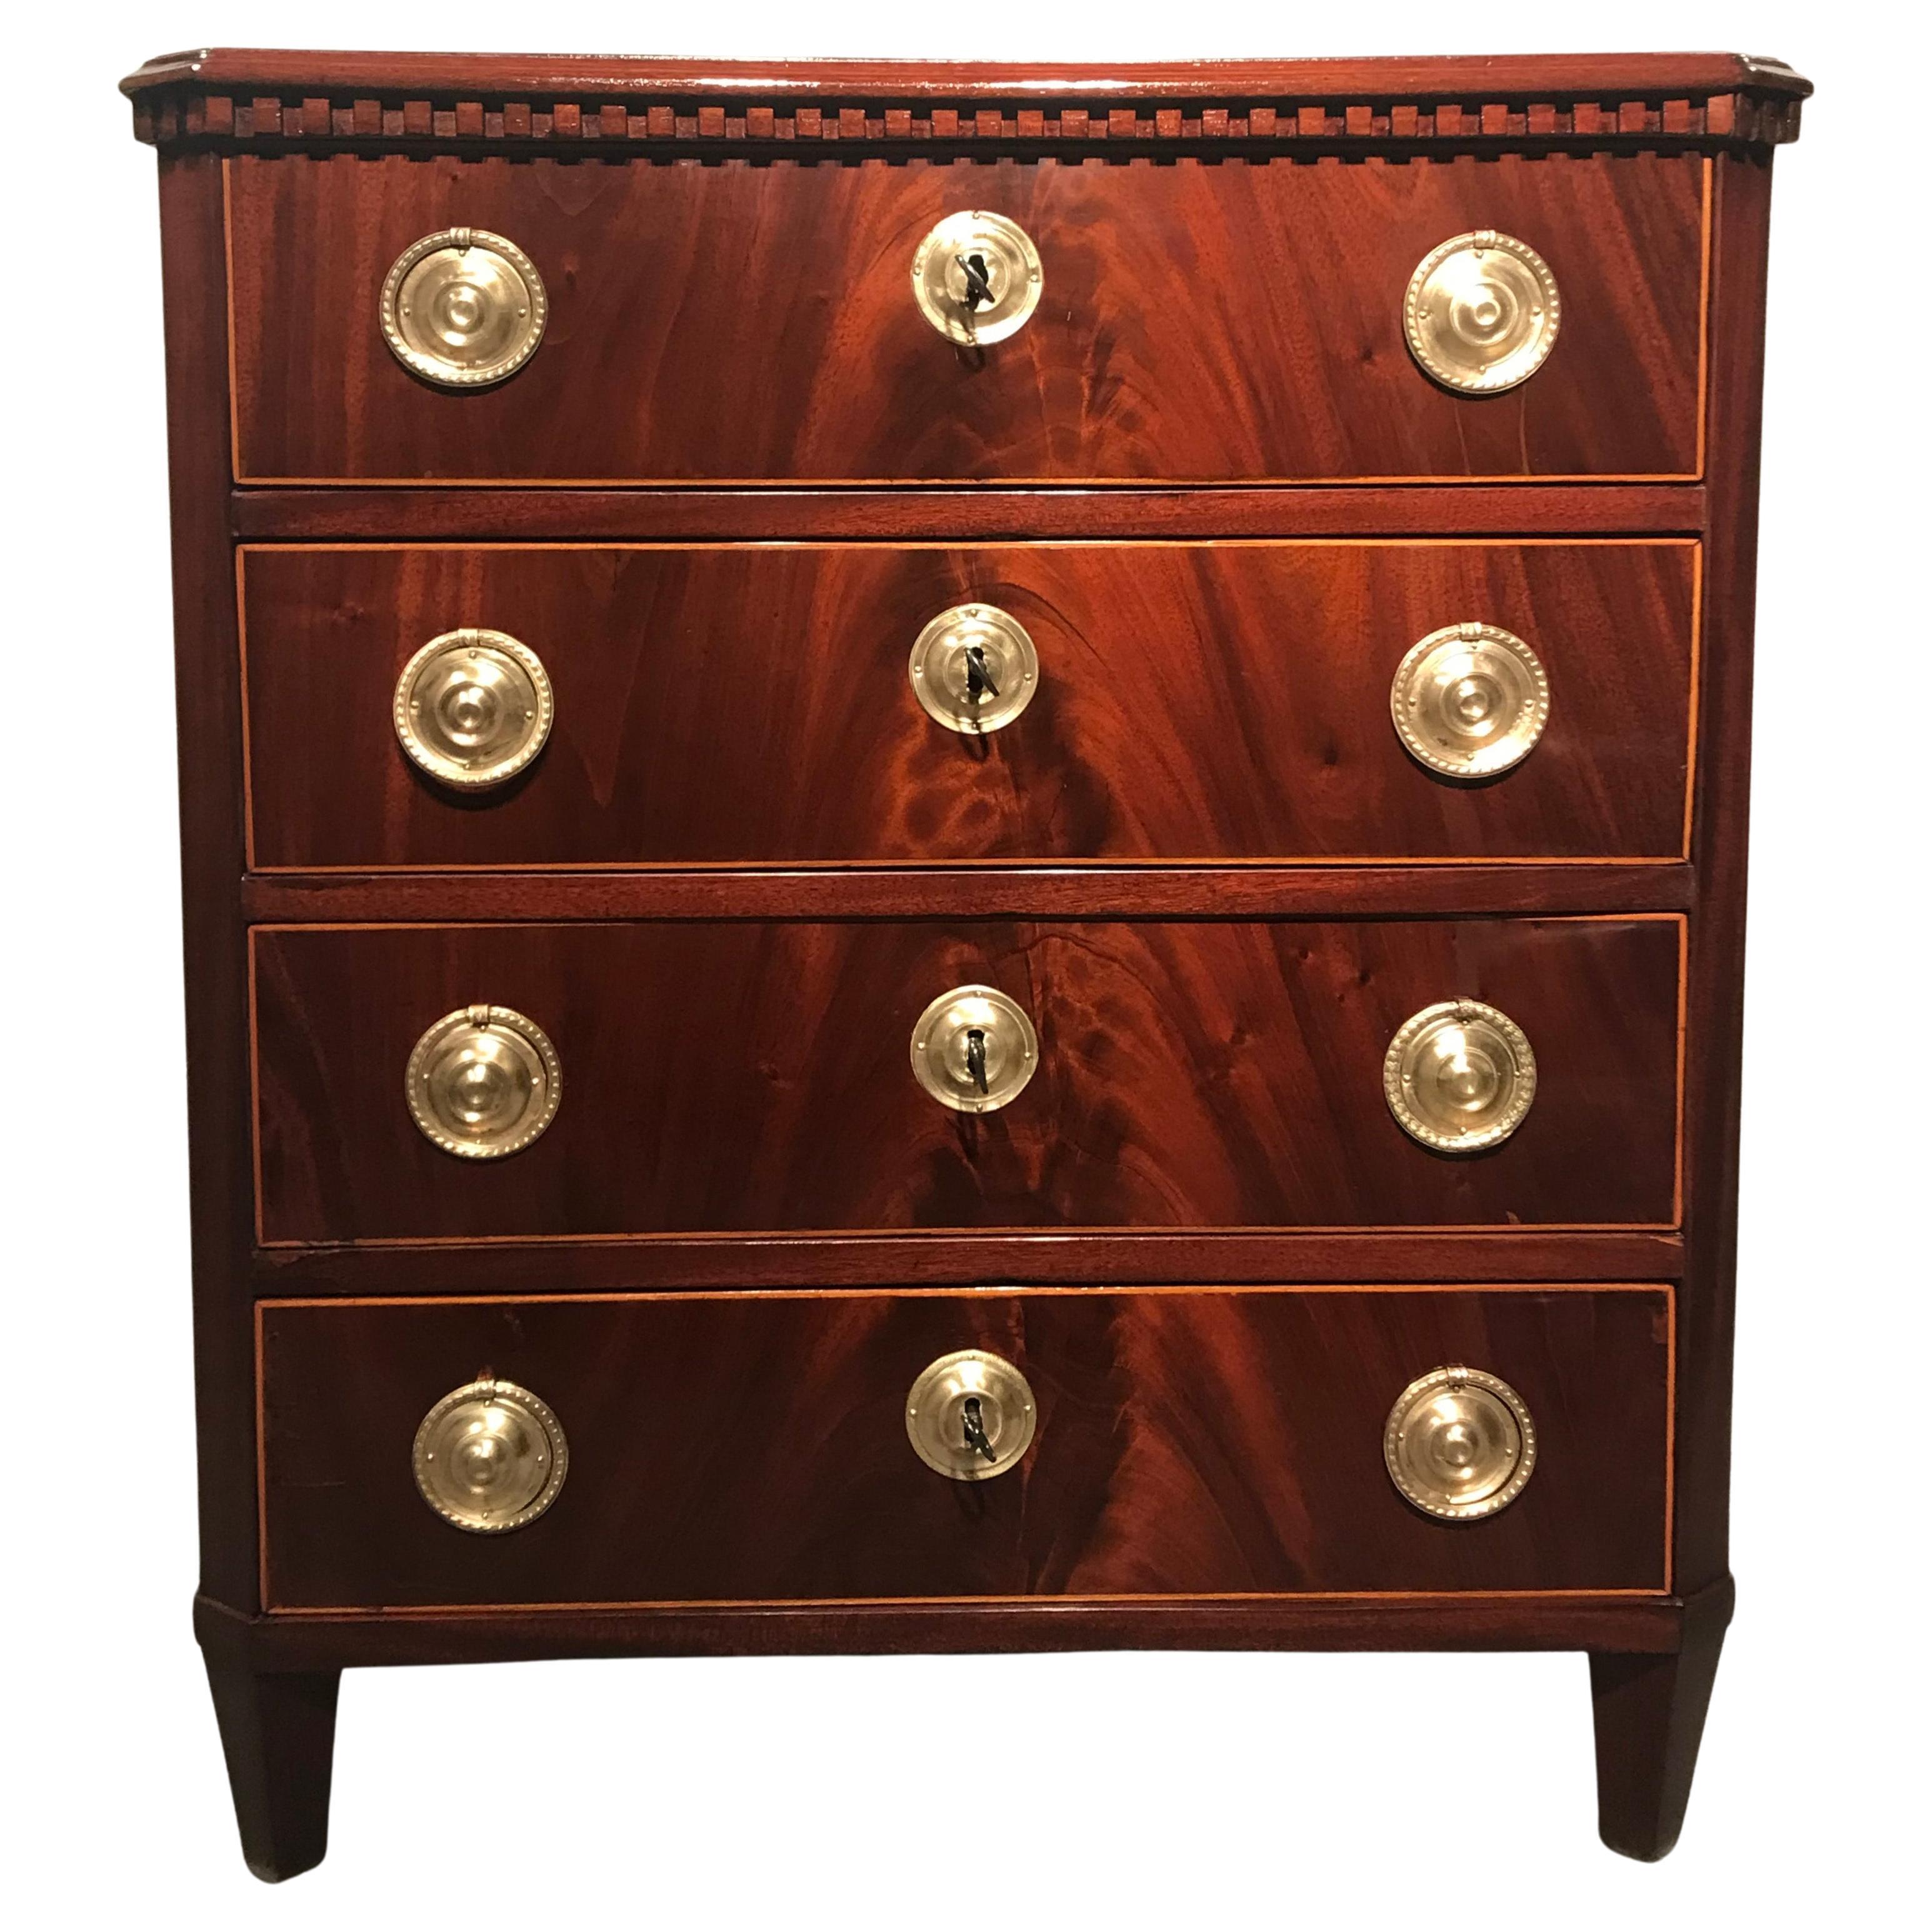 Neoclassical Chest of Drawers, Northern Germany around 1800